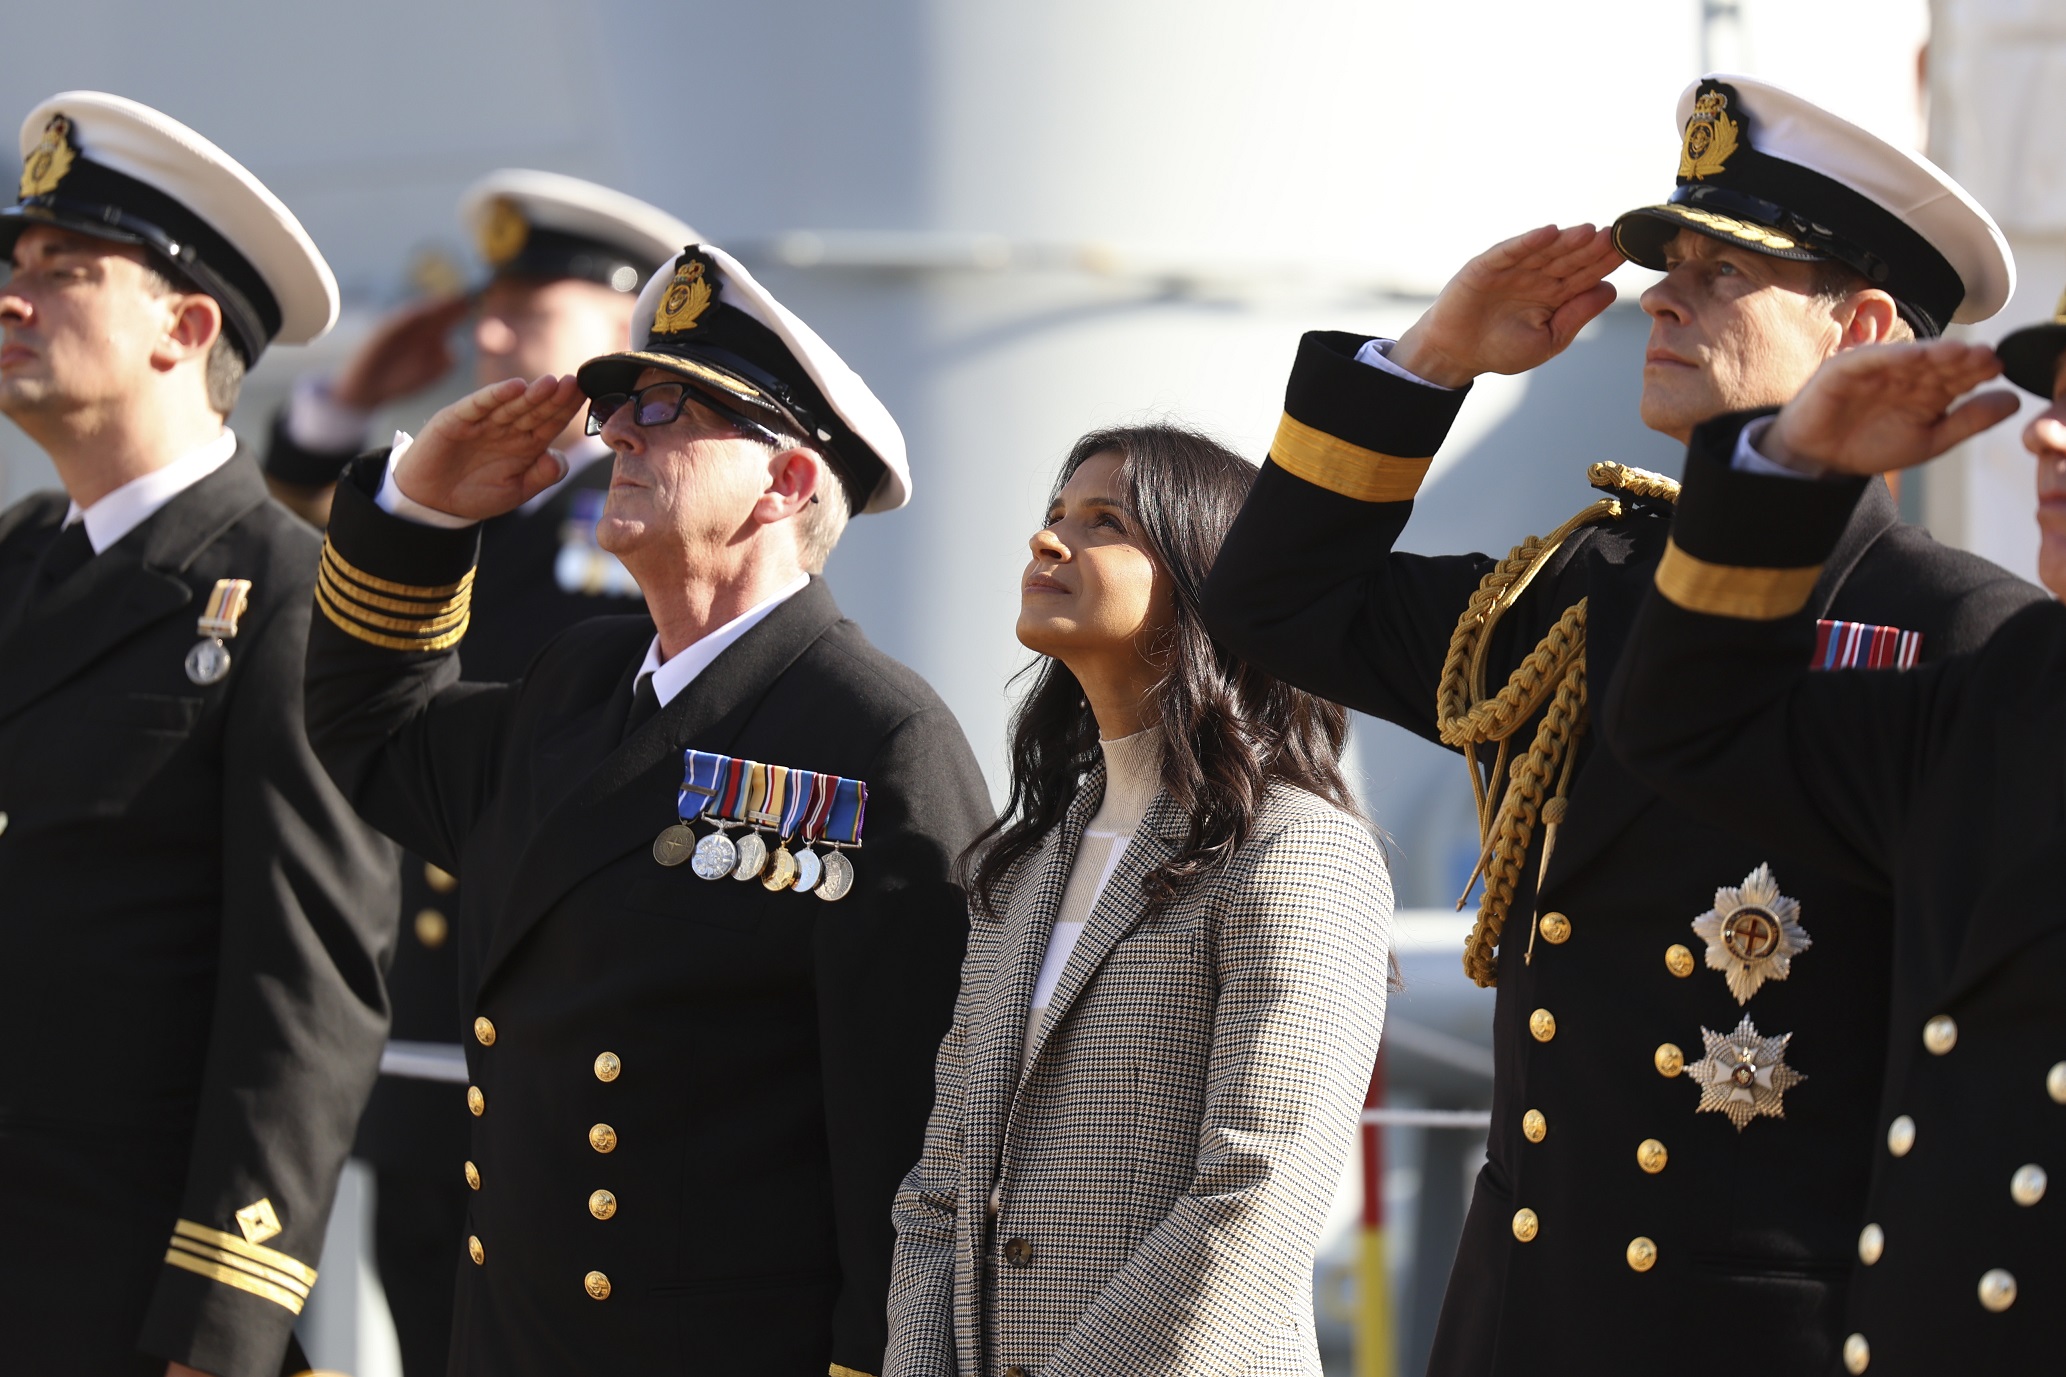 HRH Prince Edward, The Duke of Edinburgh, and businesswoman Akshata Murty, the wife of Prime Minister Rishi Sunak aboard RFA Proteus for the Service of Dedication. The UK today has a new ship dedicated to monitoring the ocean depths. Dedicated at a ceremony in the heart of the nations capital, RFA Proteus will serve as the launchpad for remotely operated vehicles and a home to a suite of specialist capabilities similar to those found in the oil and gas industries. The ship, which will be operated by the Royal Fleet Auxiliary  the crucial support arm of the Royal Navy  was formally dedicated on the Thames in the presence of the RFA Commodore-in Chief, Prince Edward, The Duke of Edinburgh, and businesswoman Akshata Murty, the wife of Prime Minister Rishi Sunak, who will be Proteus Sponsor throughout the ship's active life.